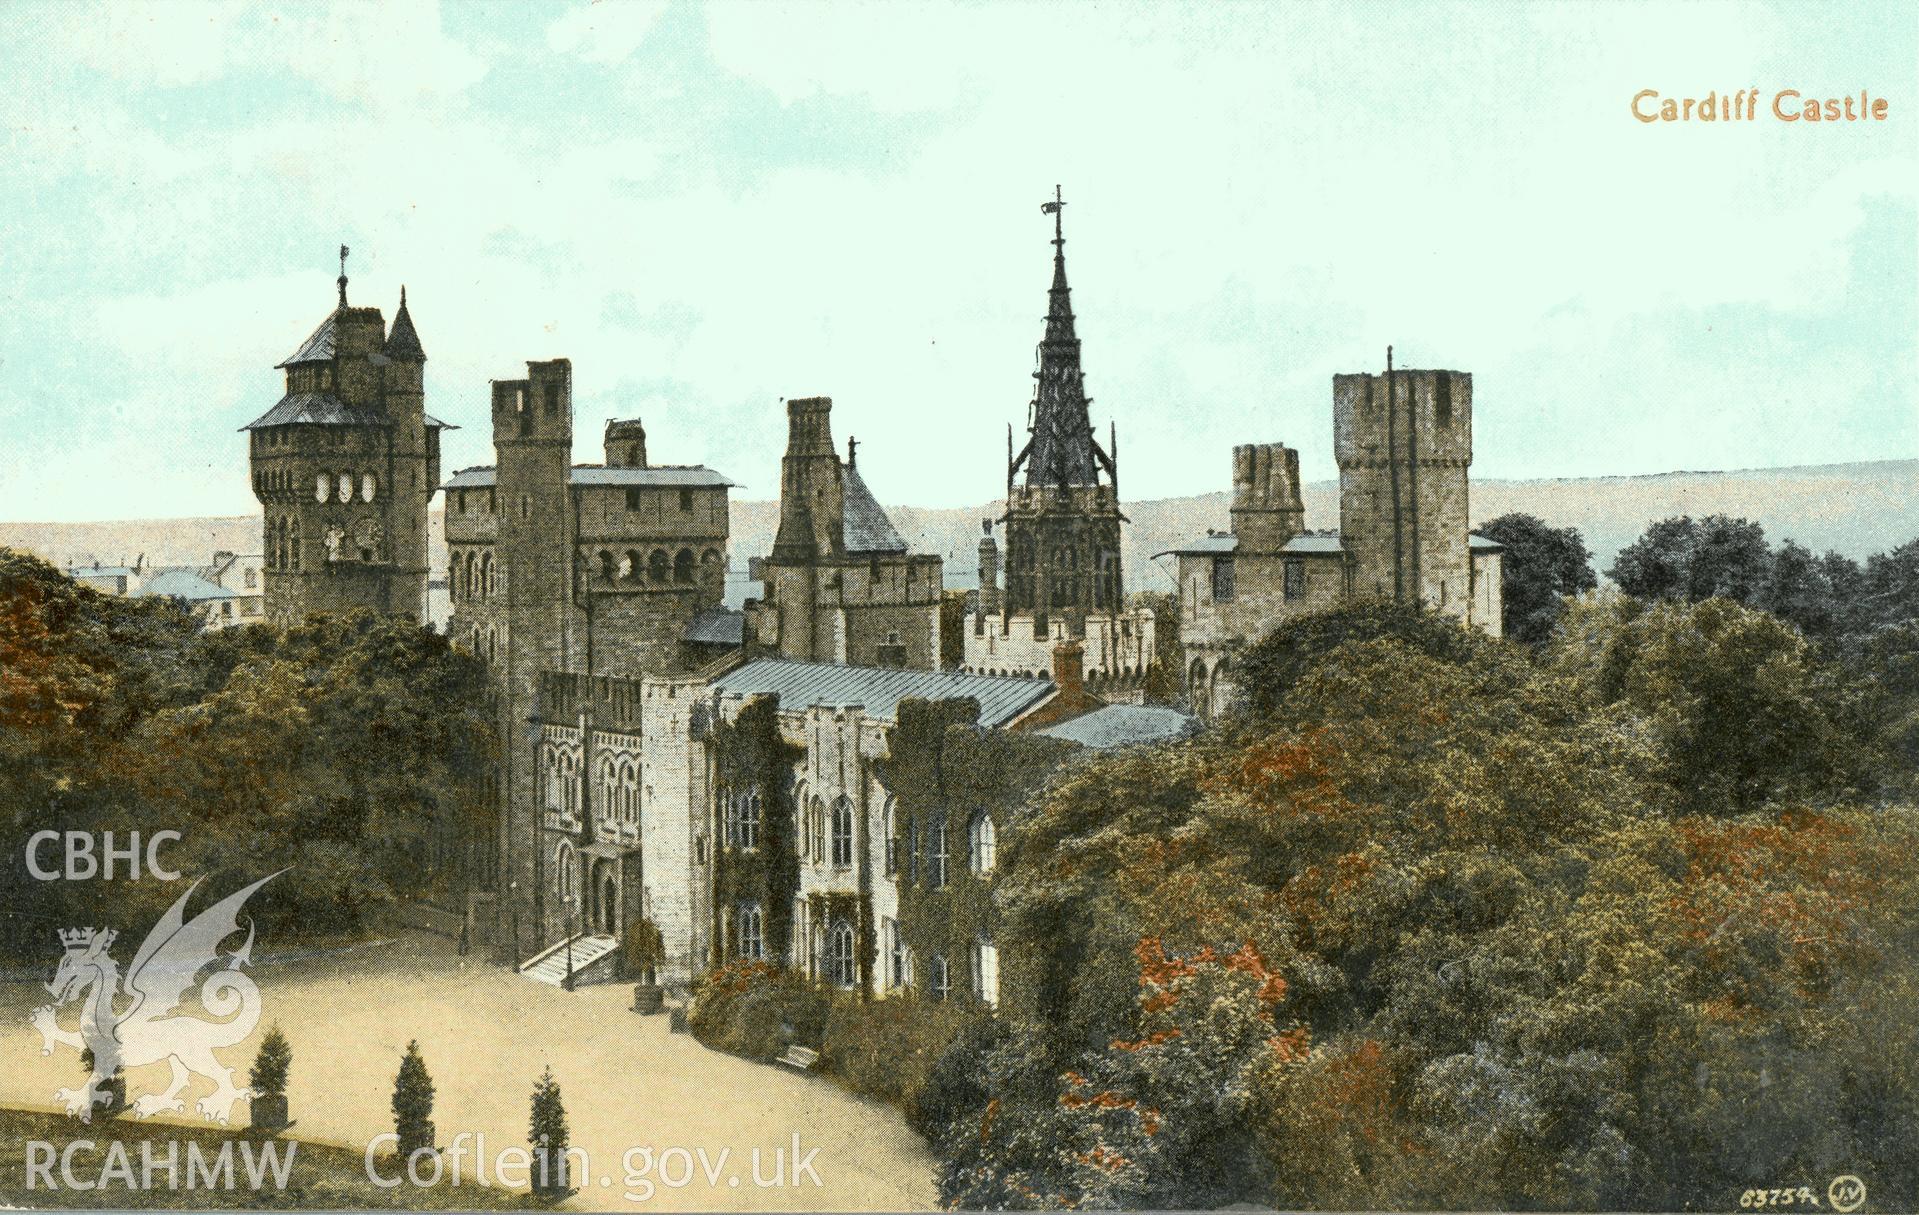 Digitised postcard image of Cardiff Castle. Produced by Parks and Gardens Data Services, from an original item in the Peter Davis Collection at Parks and Gardens UK. We hold only web-resolution images of this collection, suitable for viewing on screen and for research purposes only. We do not hold the original images, or publication quality scans.